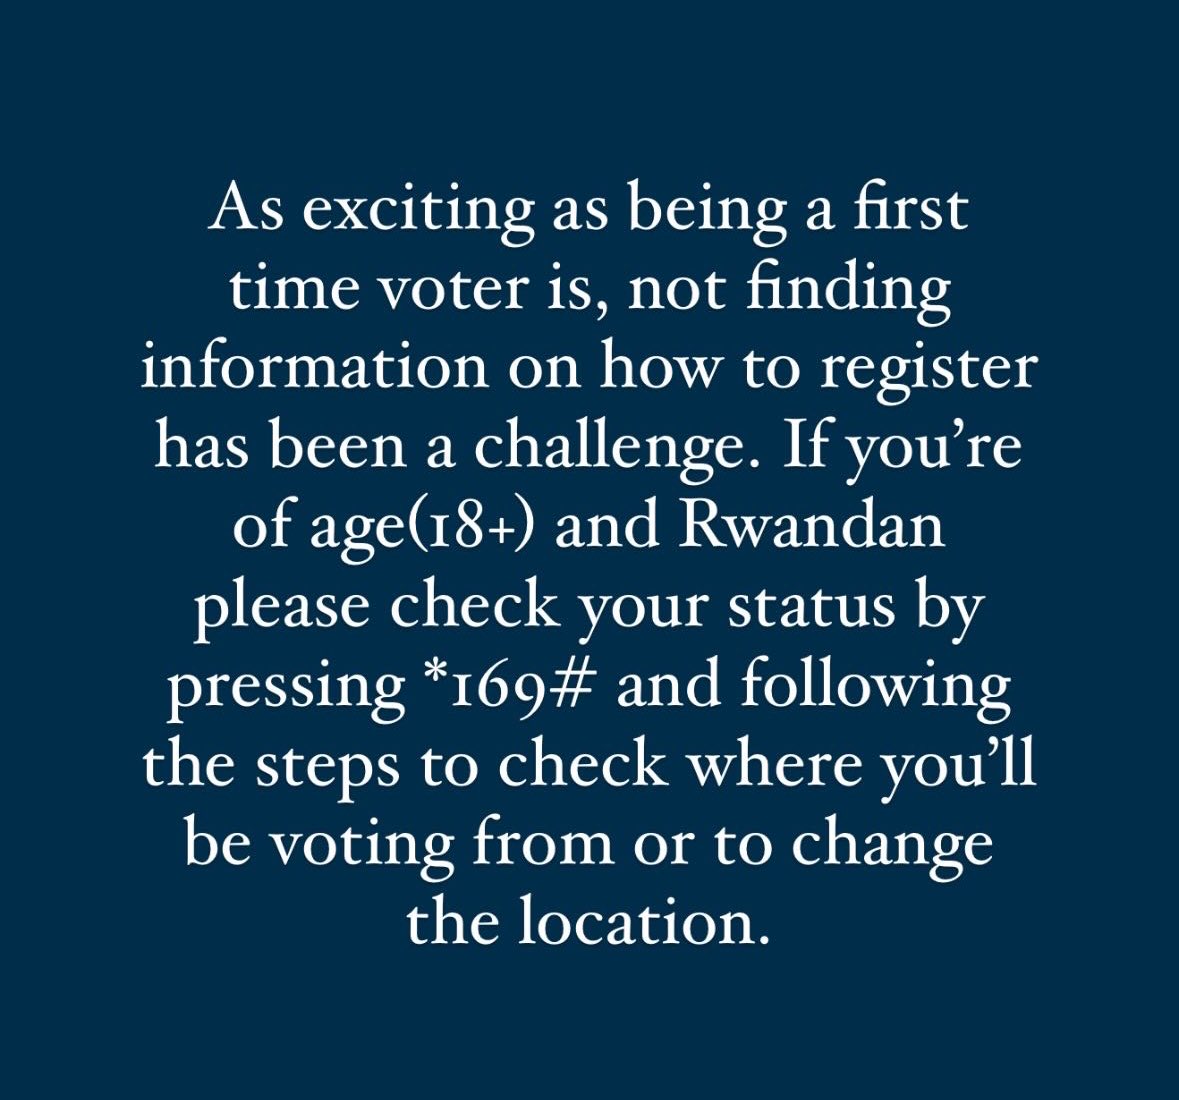 #RWoT Check your voter profile/location!! *169#